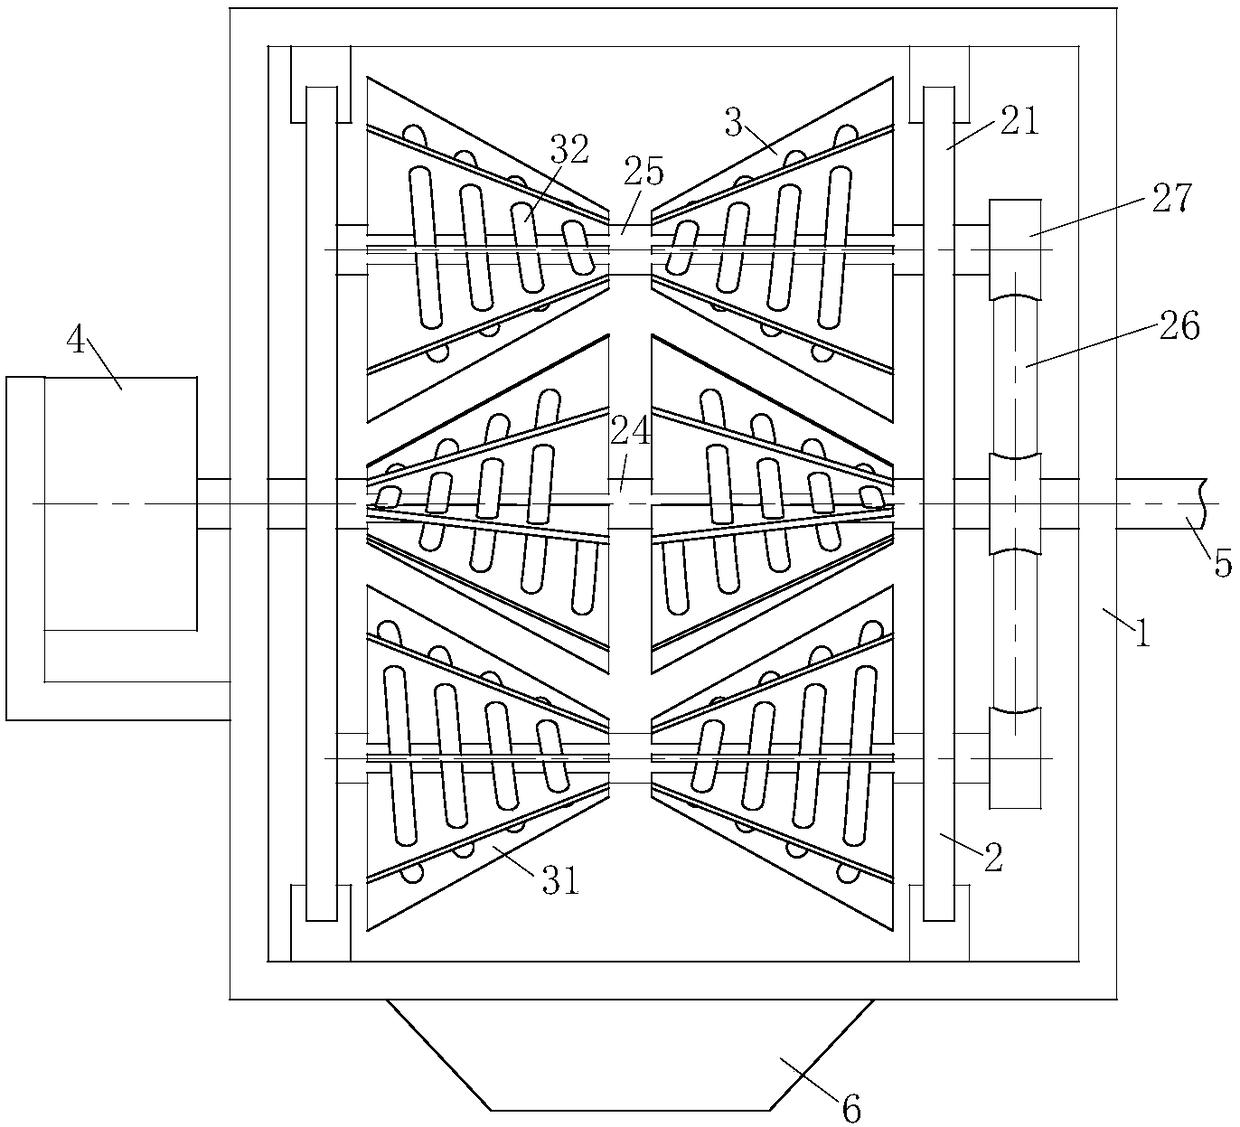 Water-cooling air-conditioner evaporator